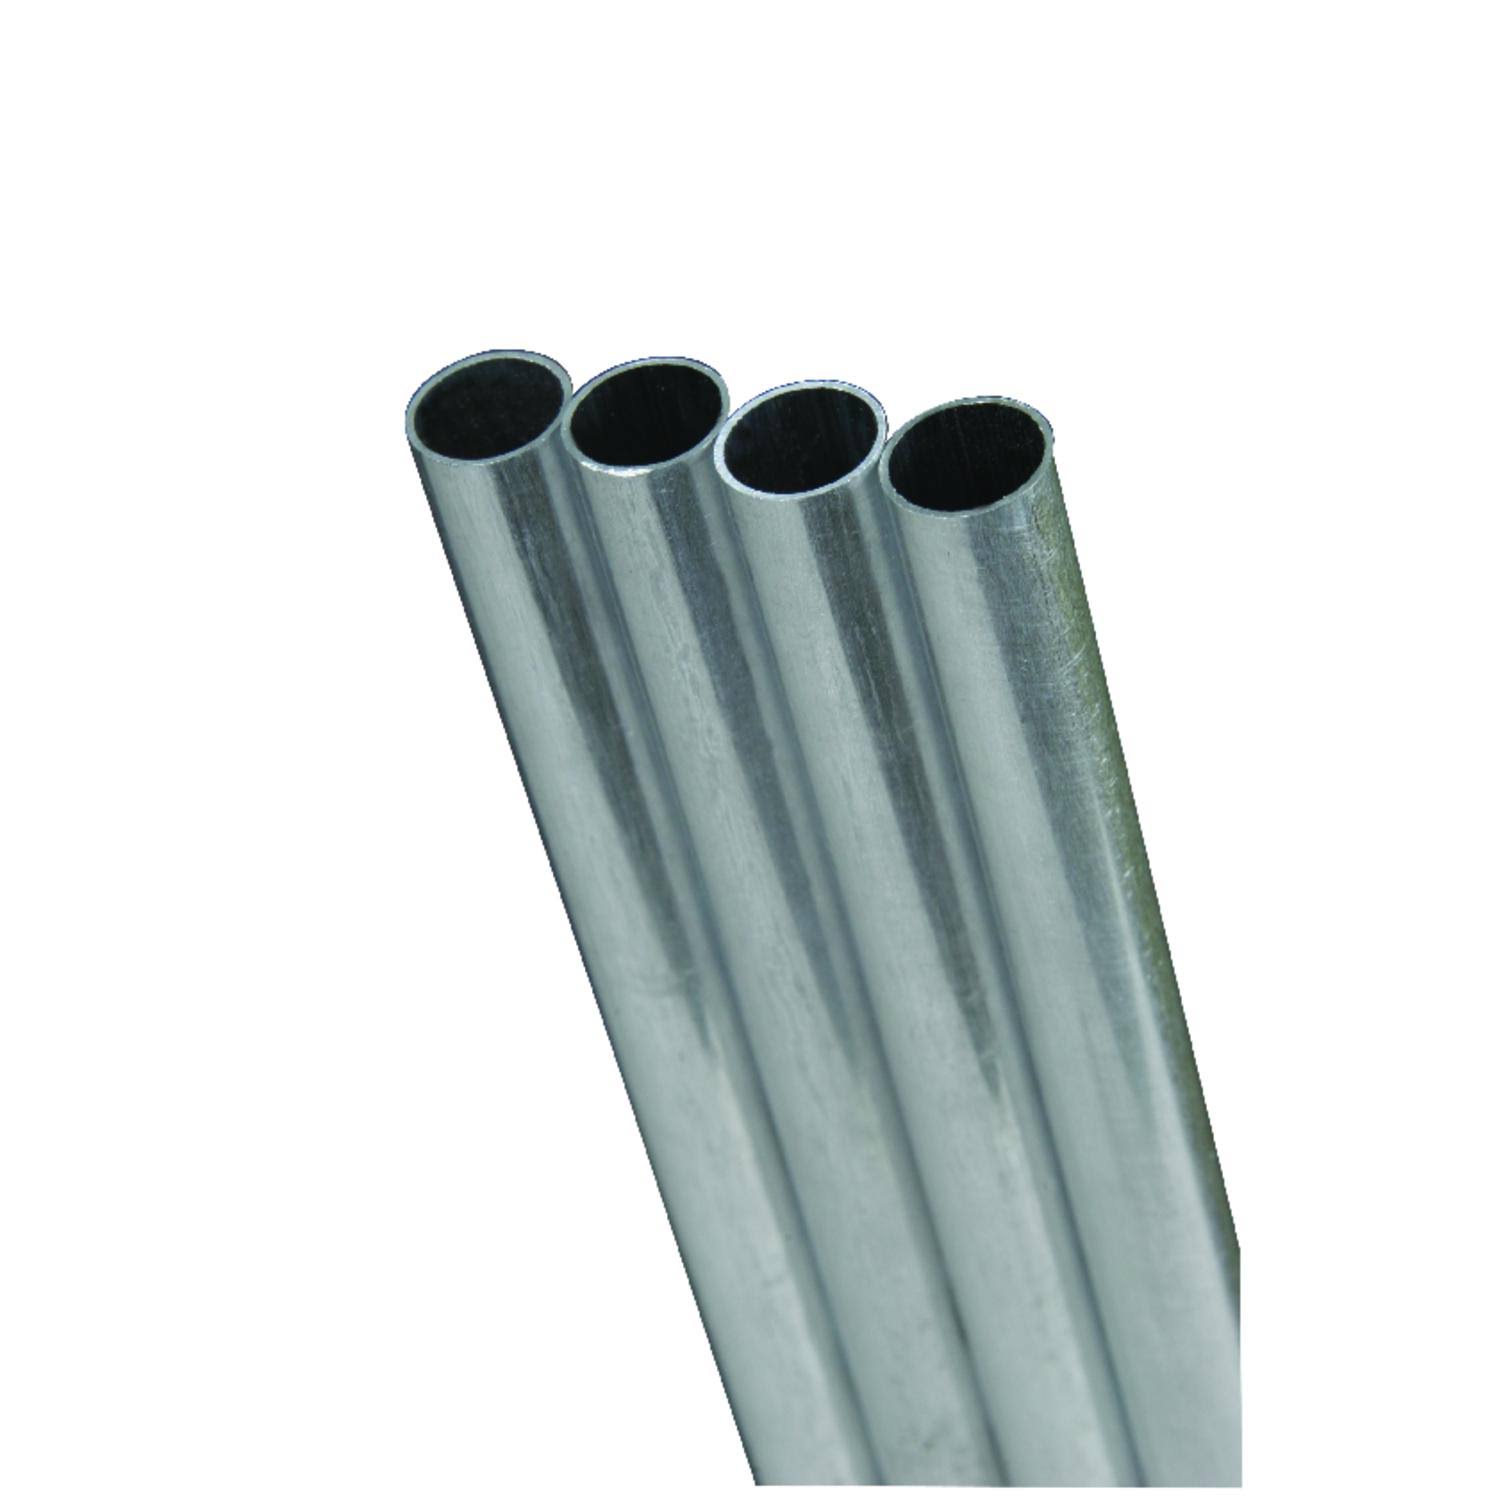 K and S Tappable Aluminum Tube - 1/4" x 0.049"